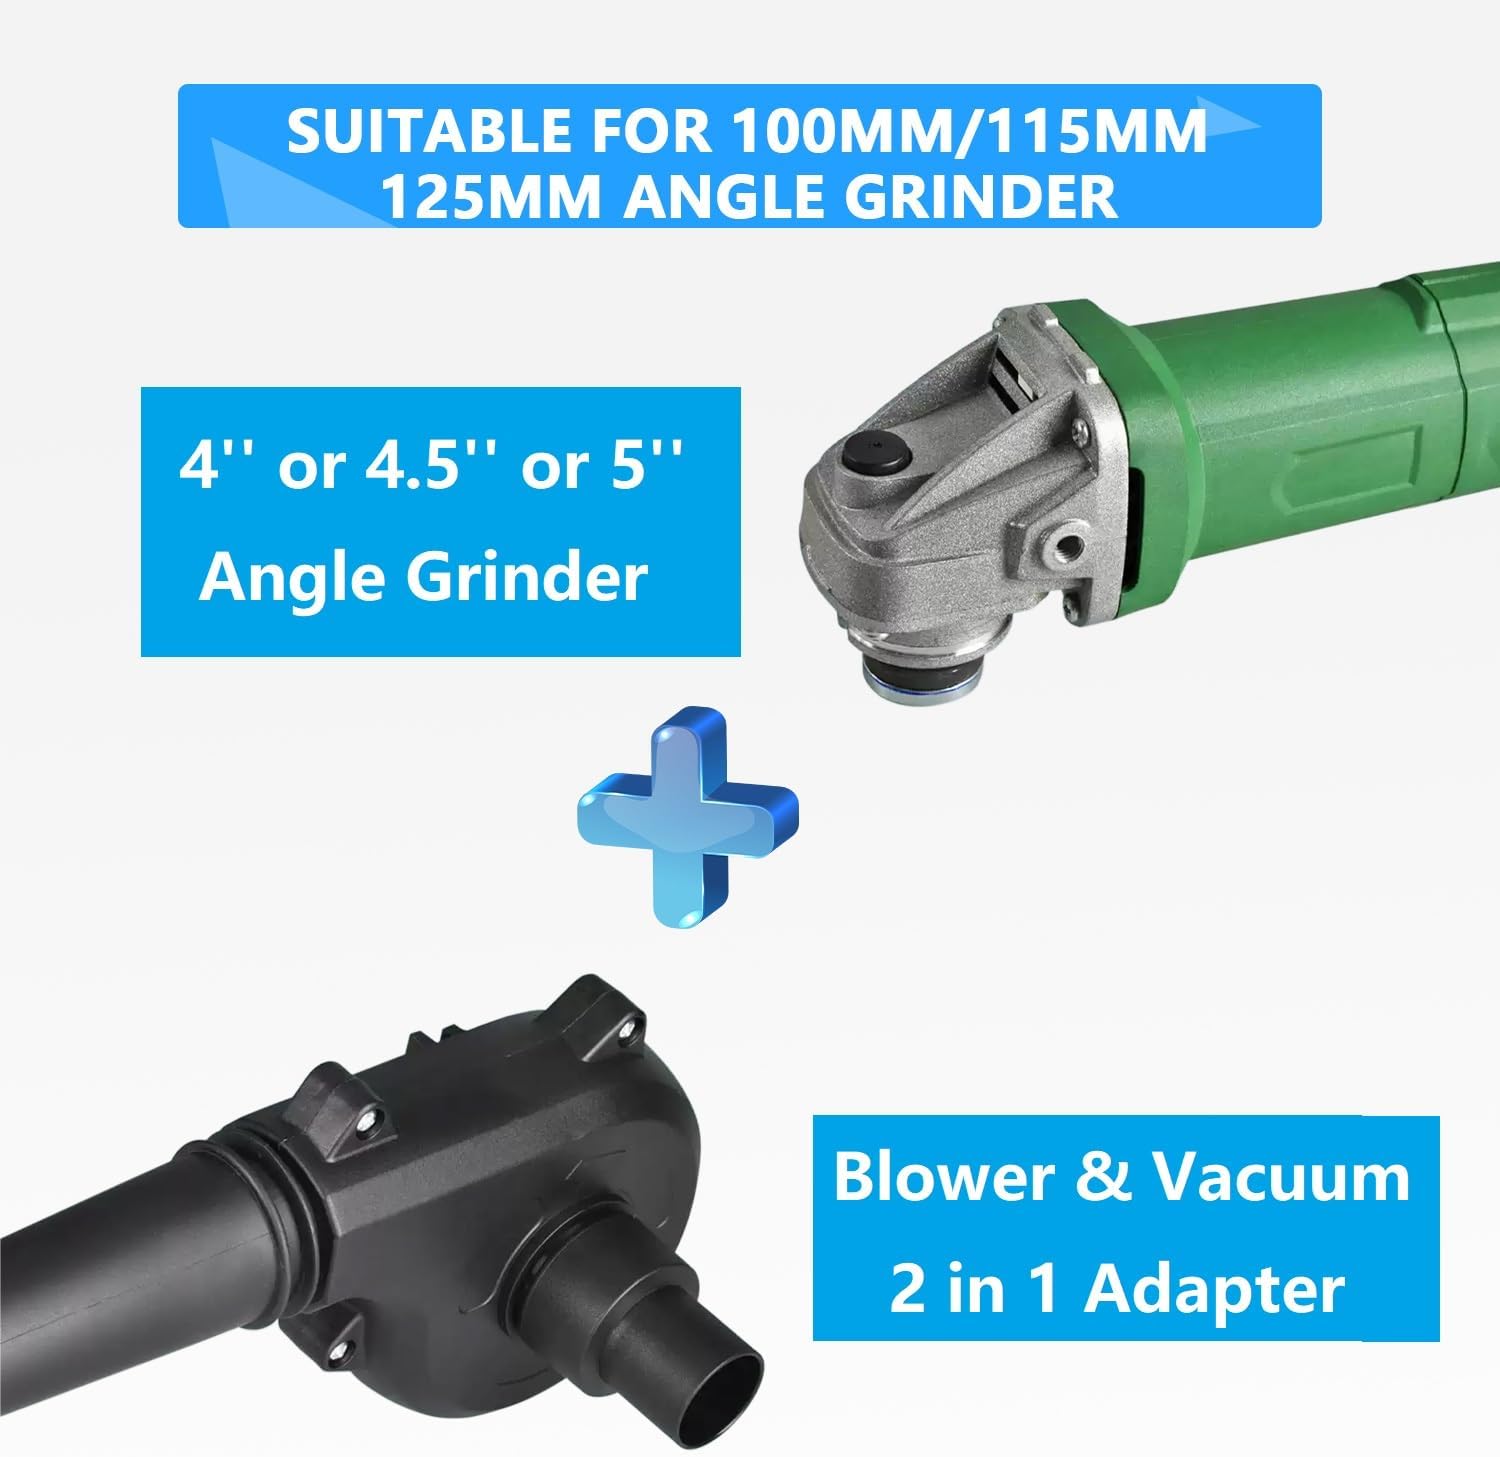 Femococ Angle Grinder to Blower Adapter Set Angle Grinder Converted Into Blower Vacuum Cleaner, 2 in 1 Multifunctional Angle Grinder Air Duster/Vacuum Cleaner Attachment